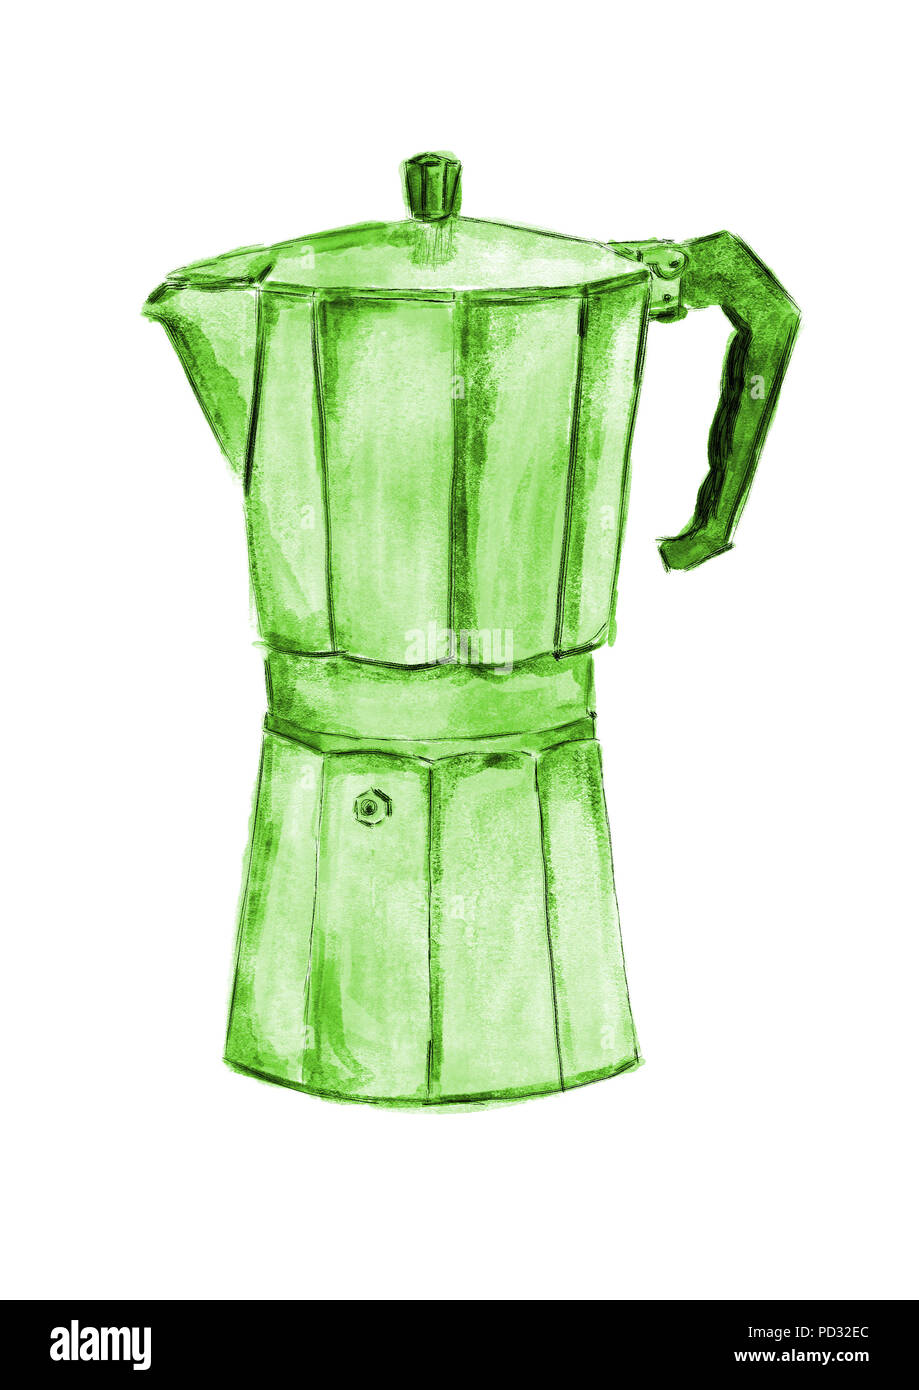 https://c8.alamy.com/comp/PD32EC/digital-watercolor-illustration-of-a-moka-pot-espresso-maker-in-a-green-color-isolated-on-a-white-background-PD32EC.jpg